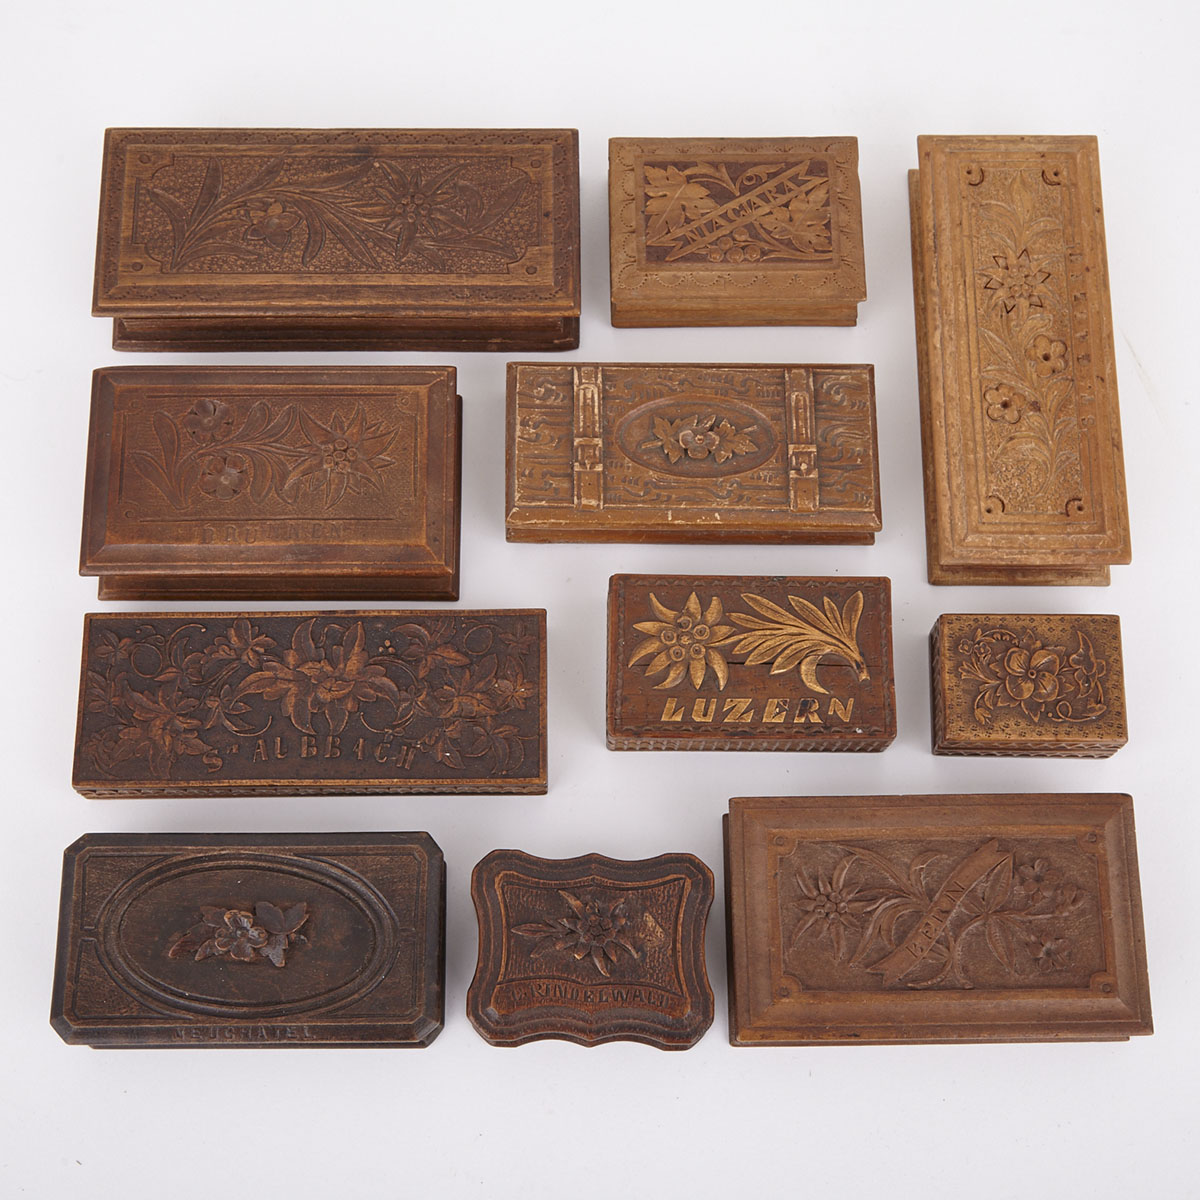 Collection of Eleven Swiss Black Forest Carved Stamp Boxes, 19th/early 20th centuries